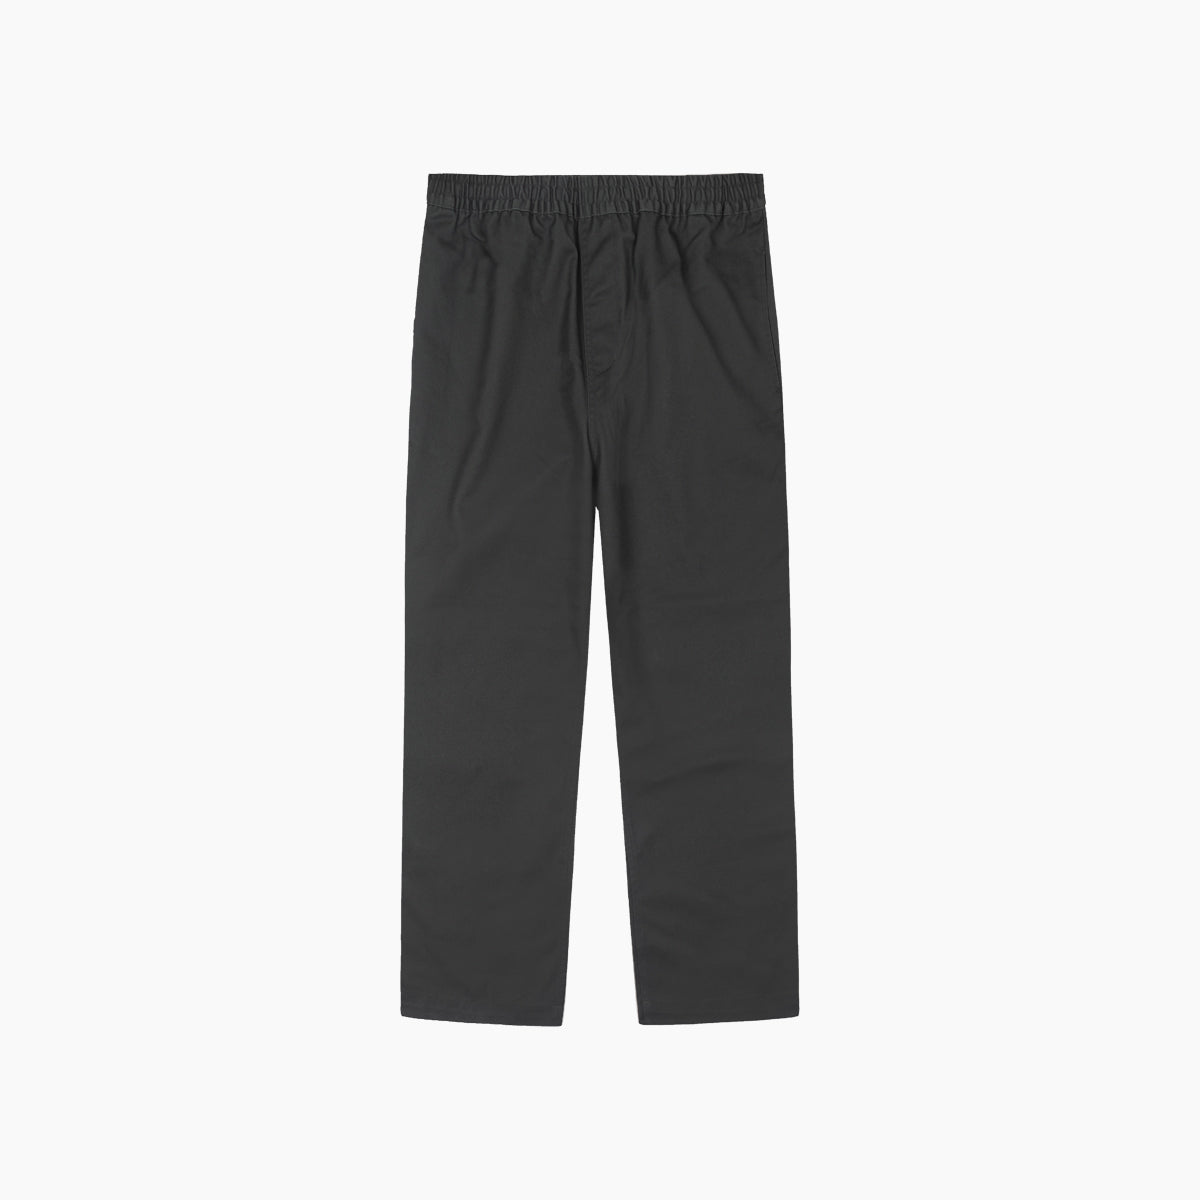 Carhartt WIP Newhaven Pant-SUEDE Store